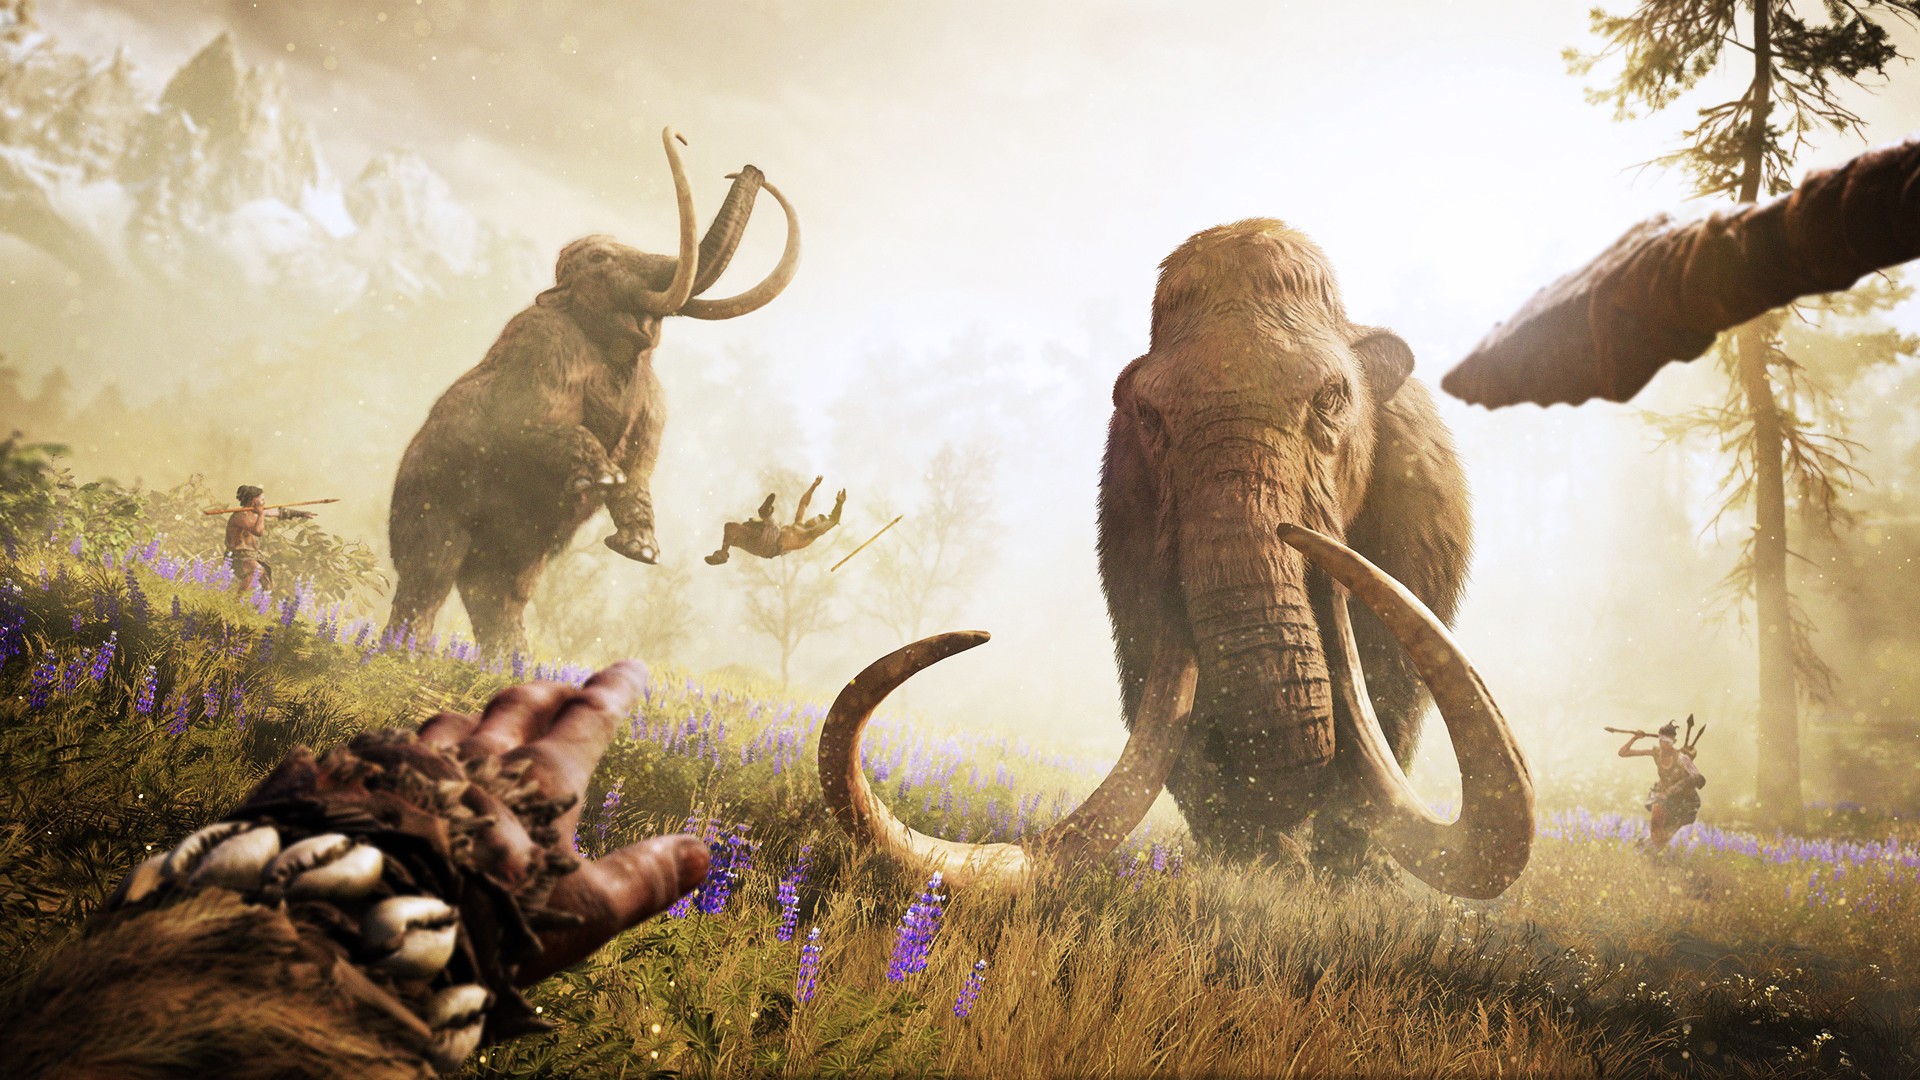 General 1920x1080 FarCry Primal  far cry primal video games 2016 (year) mammoths Ubisoft PC gaming animals